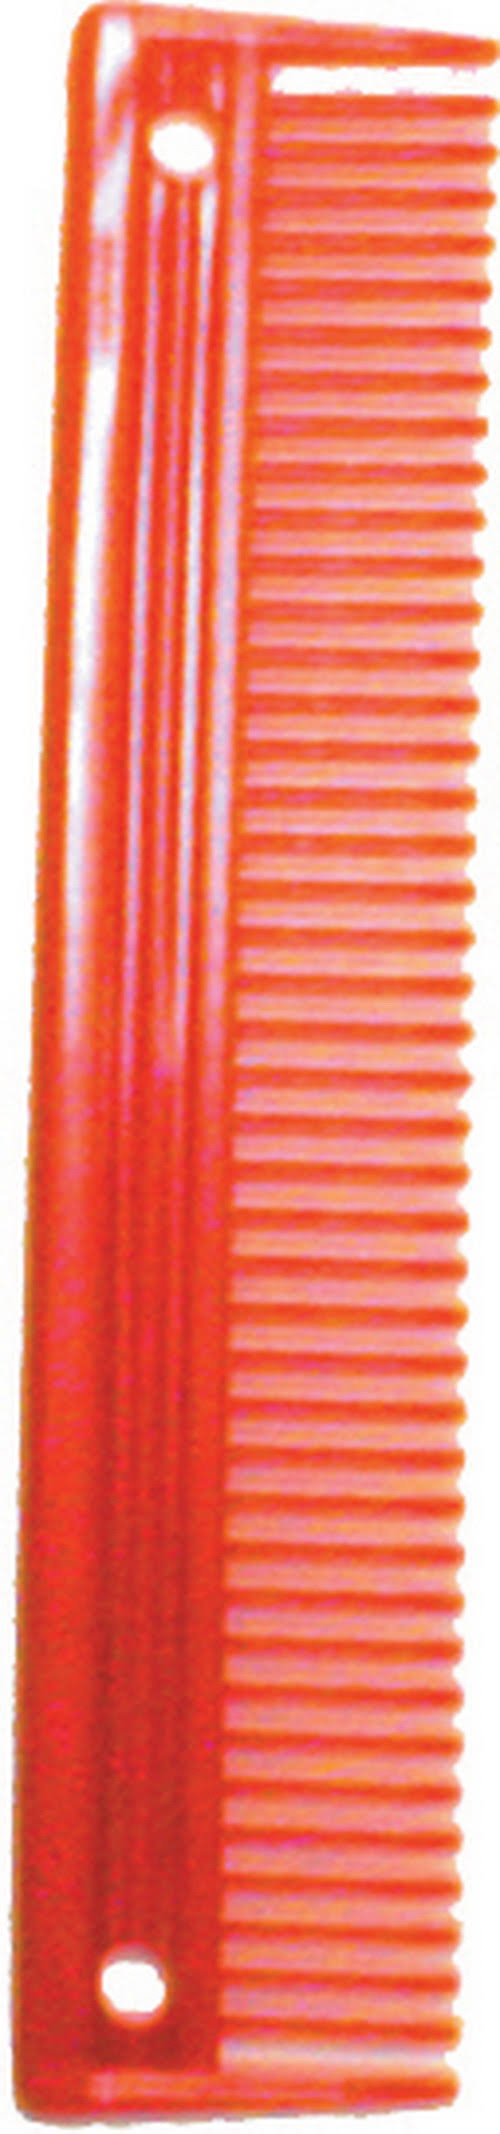 Partrade Animal Comb - Red, 9"